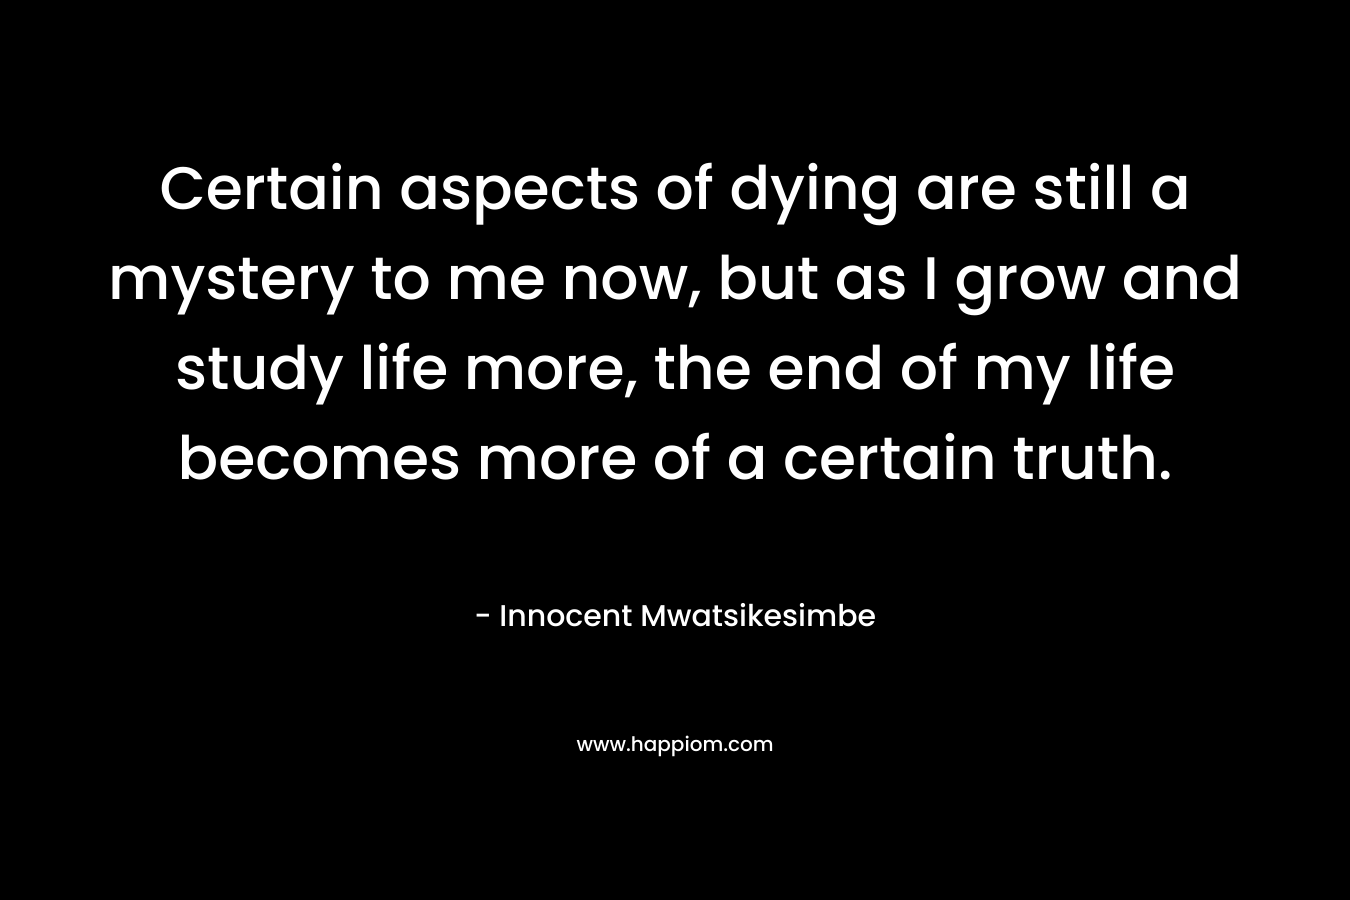 Certain aspects of dying are still a mystery to me now, but as I grow and study life more, the end of my life becomes more of a certain truth. – Innocent Mwatsikesimbe